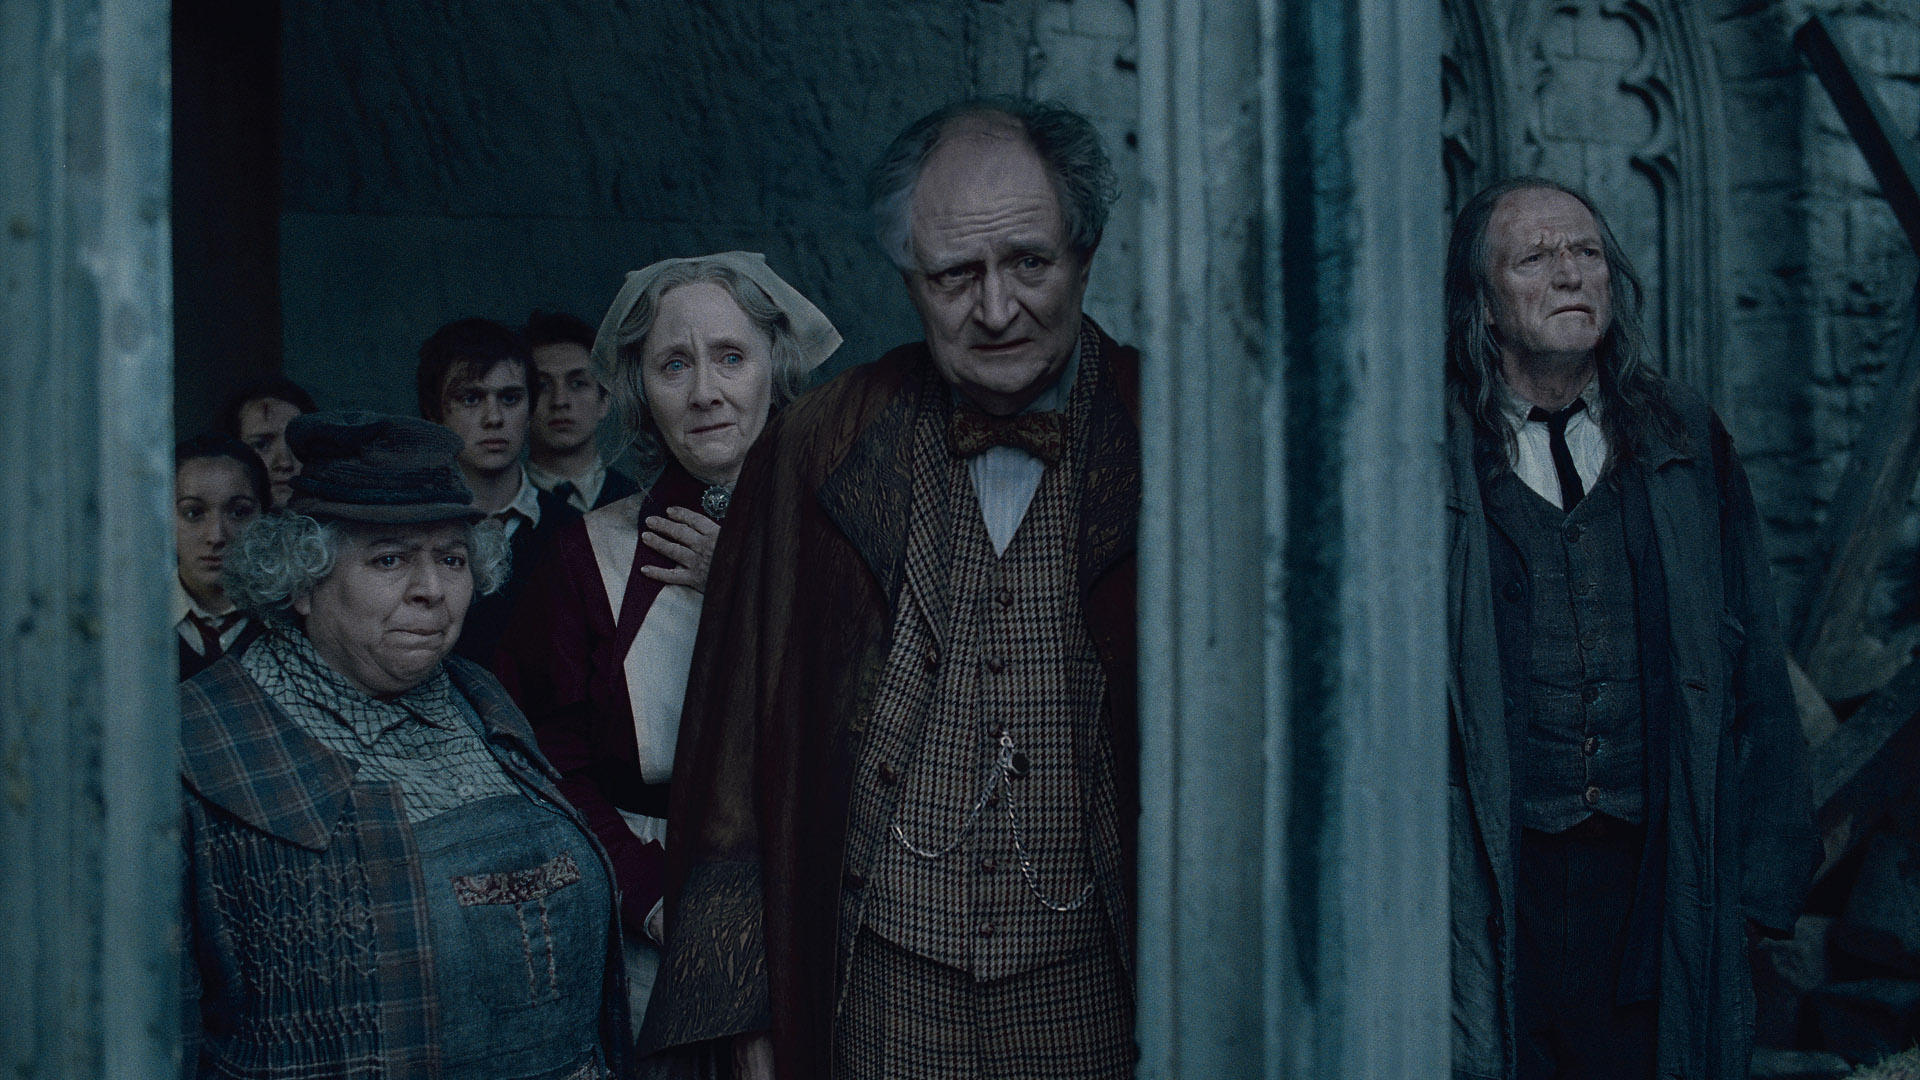 ‘There’s an emotional attachment’ - Harry Potter is not just for children 